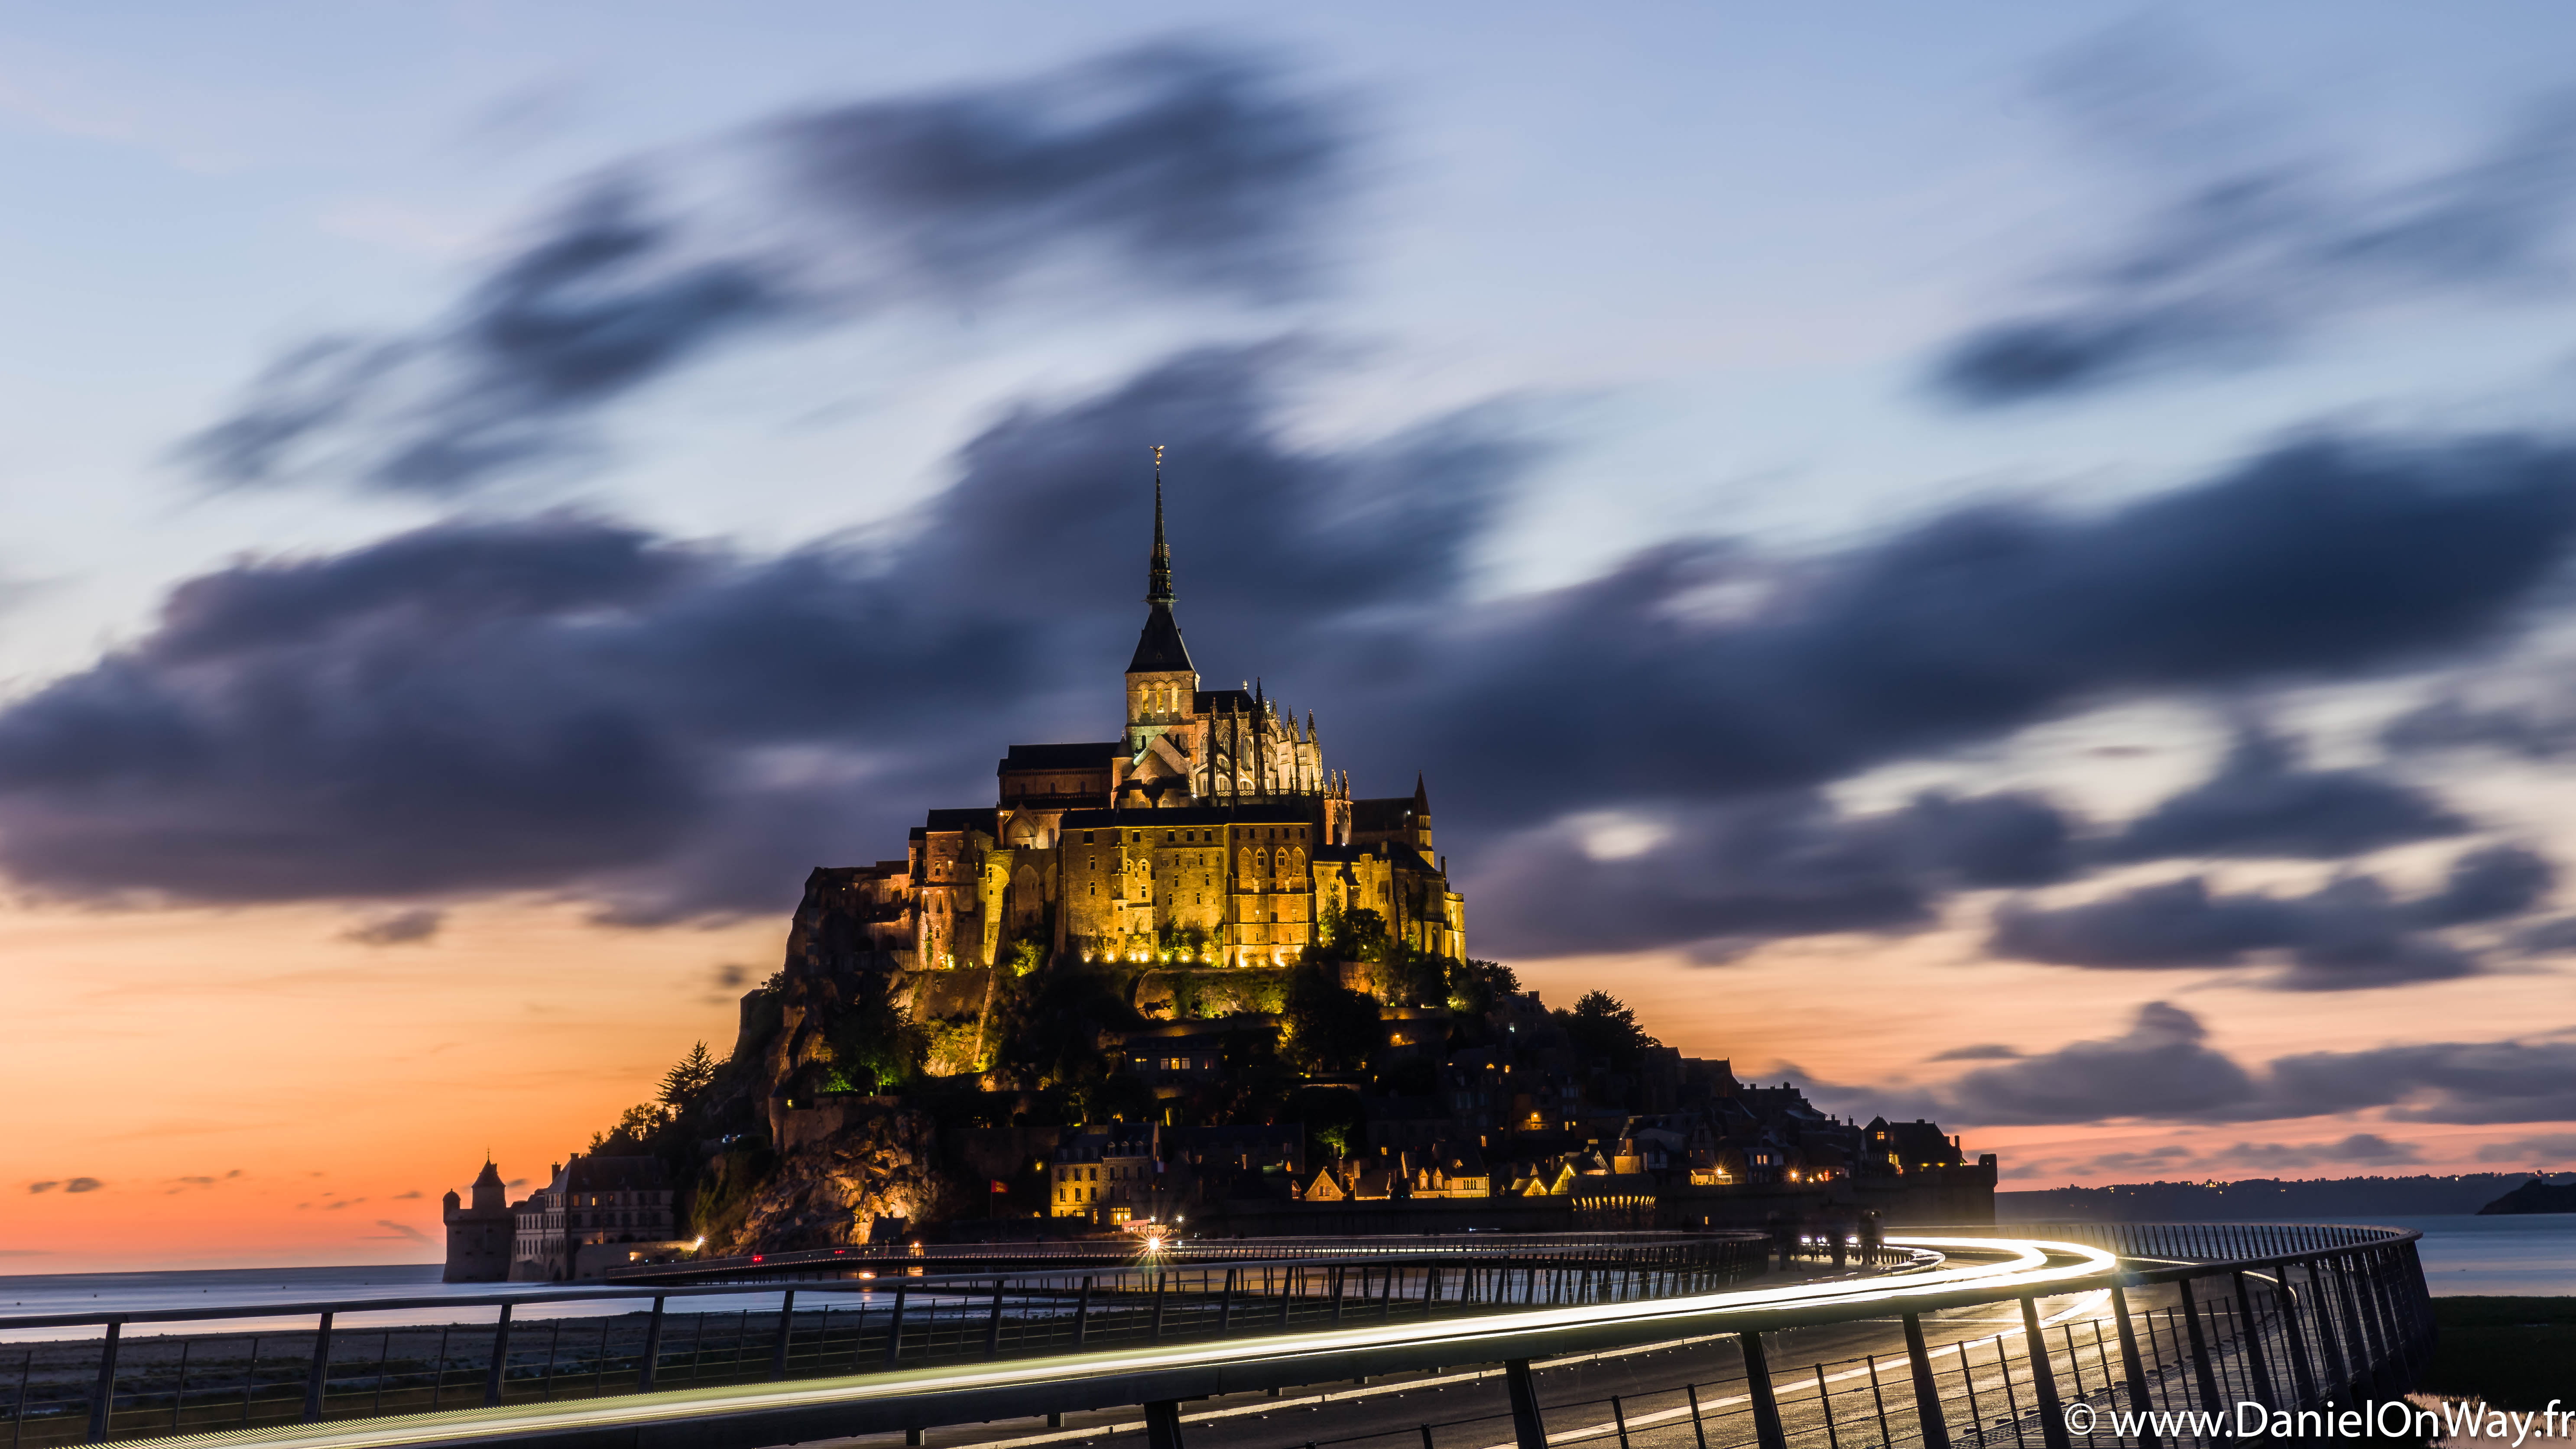 timelapse photo of castle surrounded by body of water near the bridge, mont saint michel